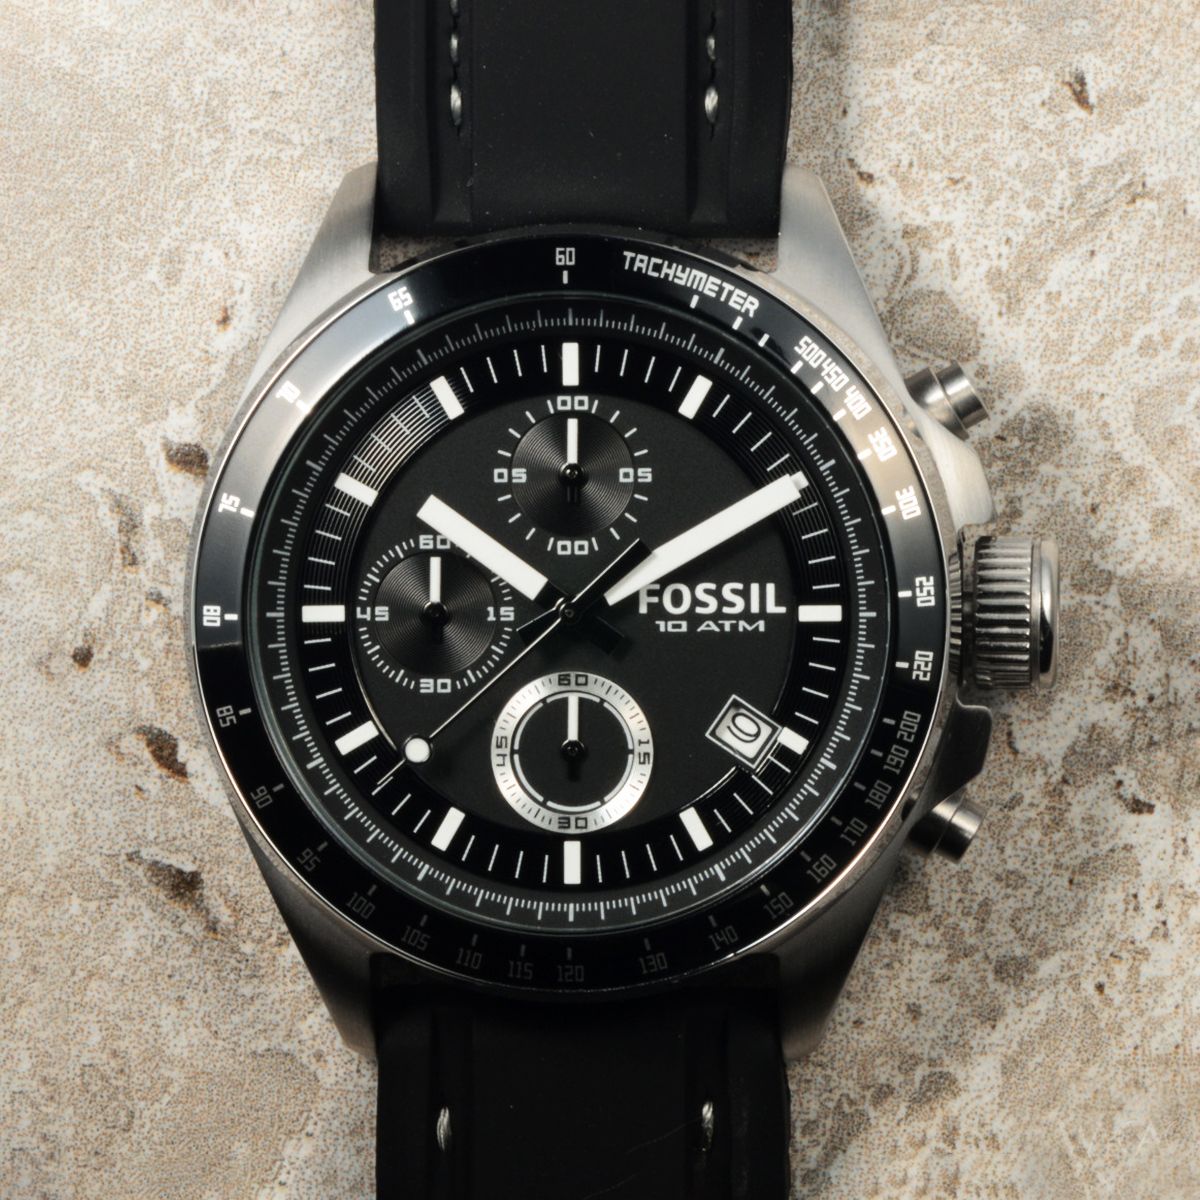 Fossil Watches for Men - An Overview of Top 10 Fossil Models